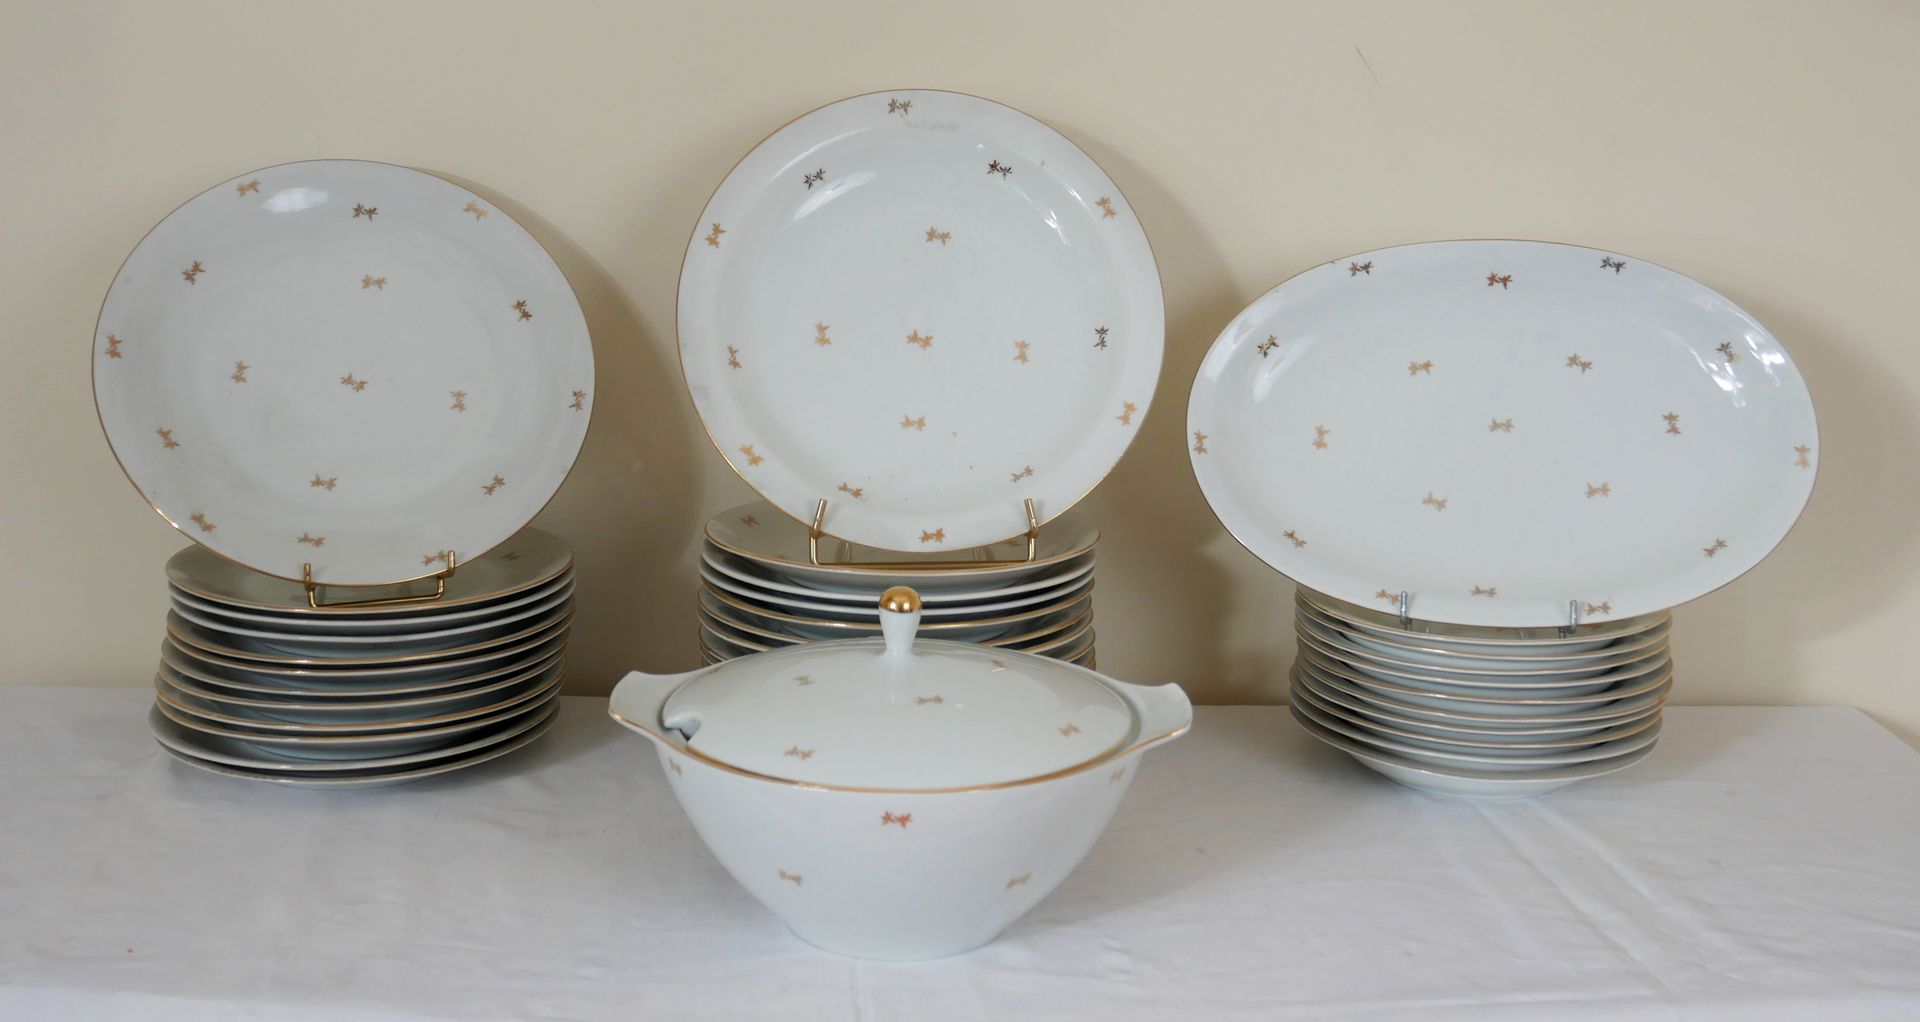 Null Part of a white porcelain dinner service with golden flowers